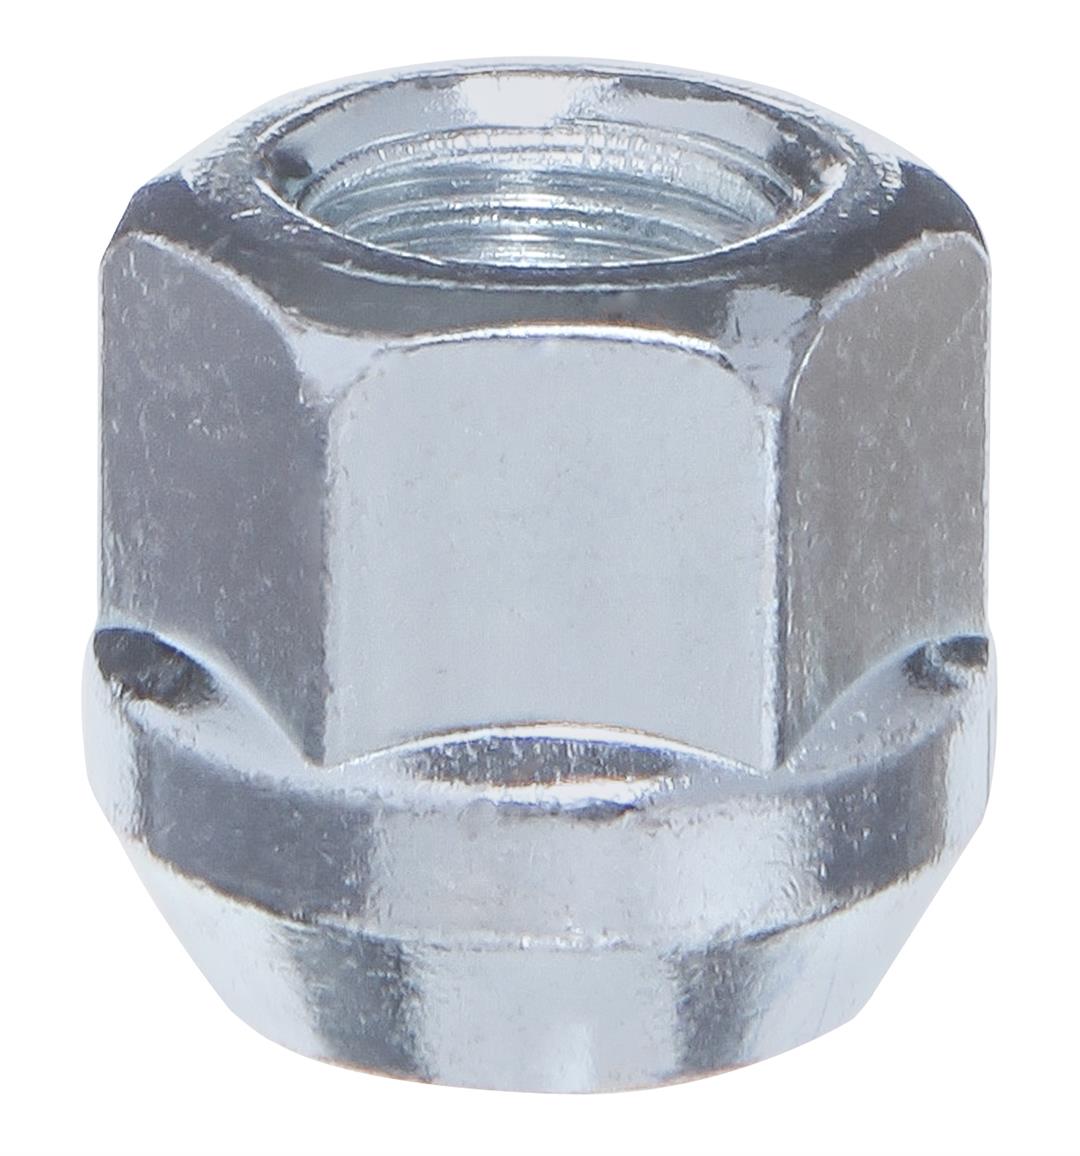 Lug Nut 12 Millimeter X 1.25 Thread Size; 60 Degree Conical Bulge; Acorn Open End; 0.83 Inch Overall Length; 13/16 Inch Hex Size; Chrome Plated; Silver; Steel; Single